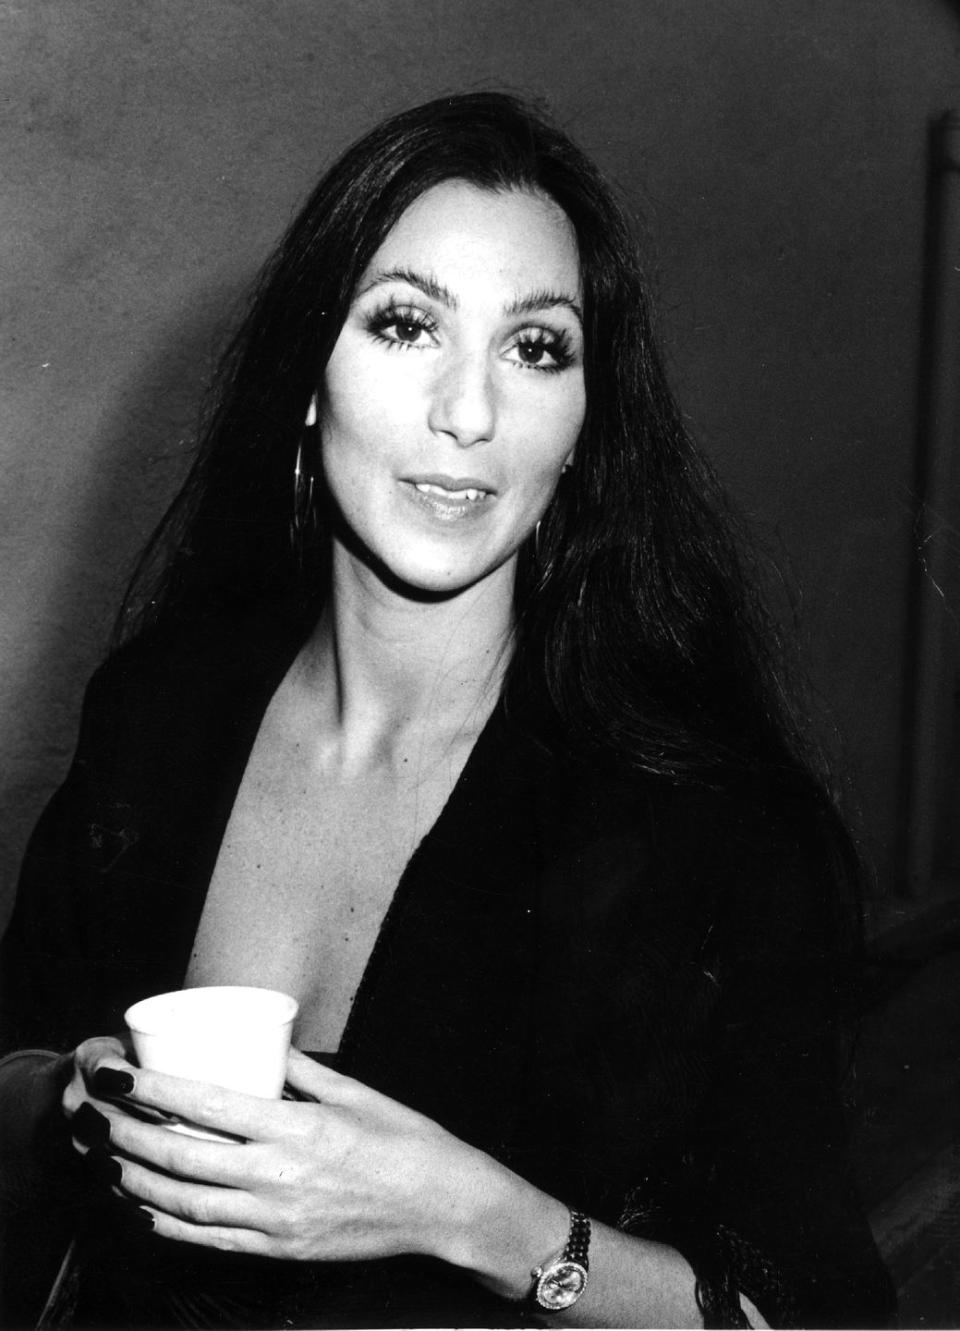 Cher at 29